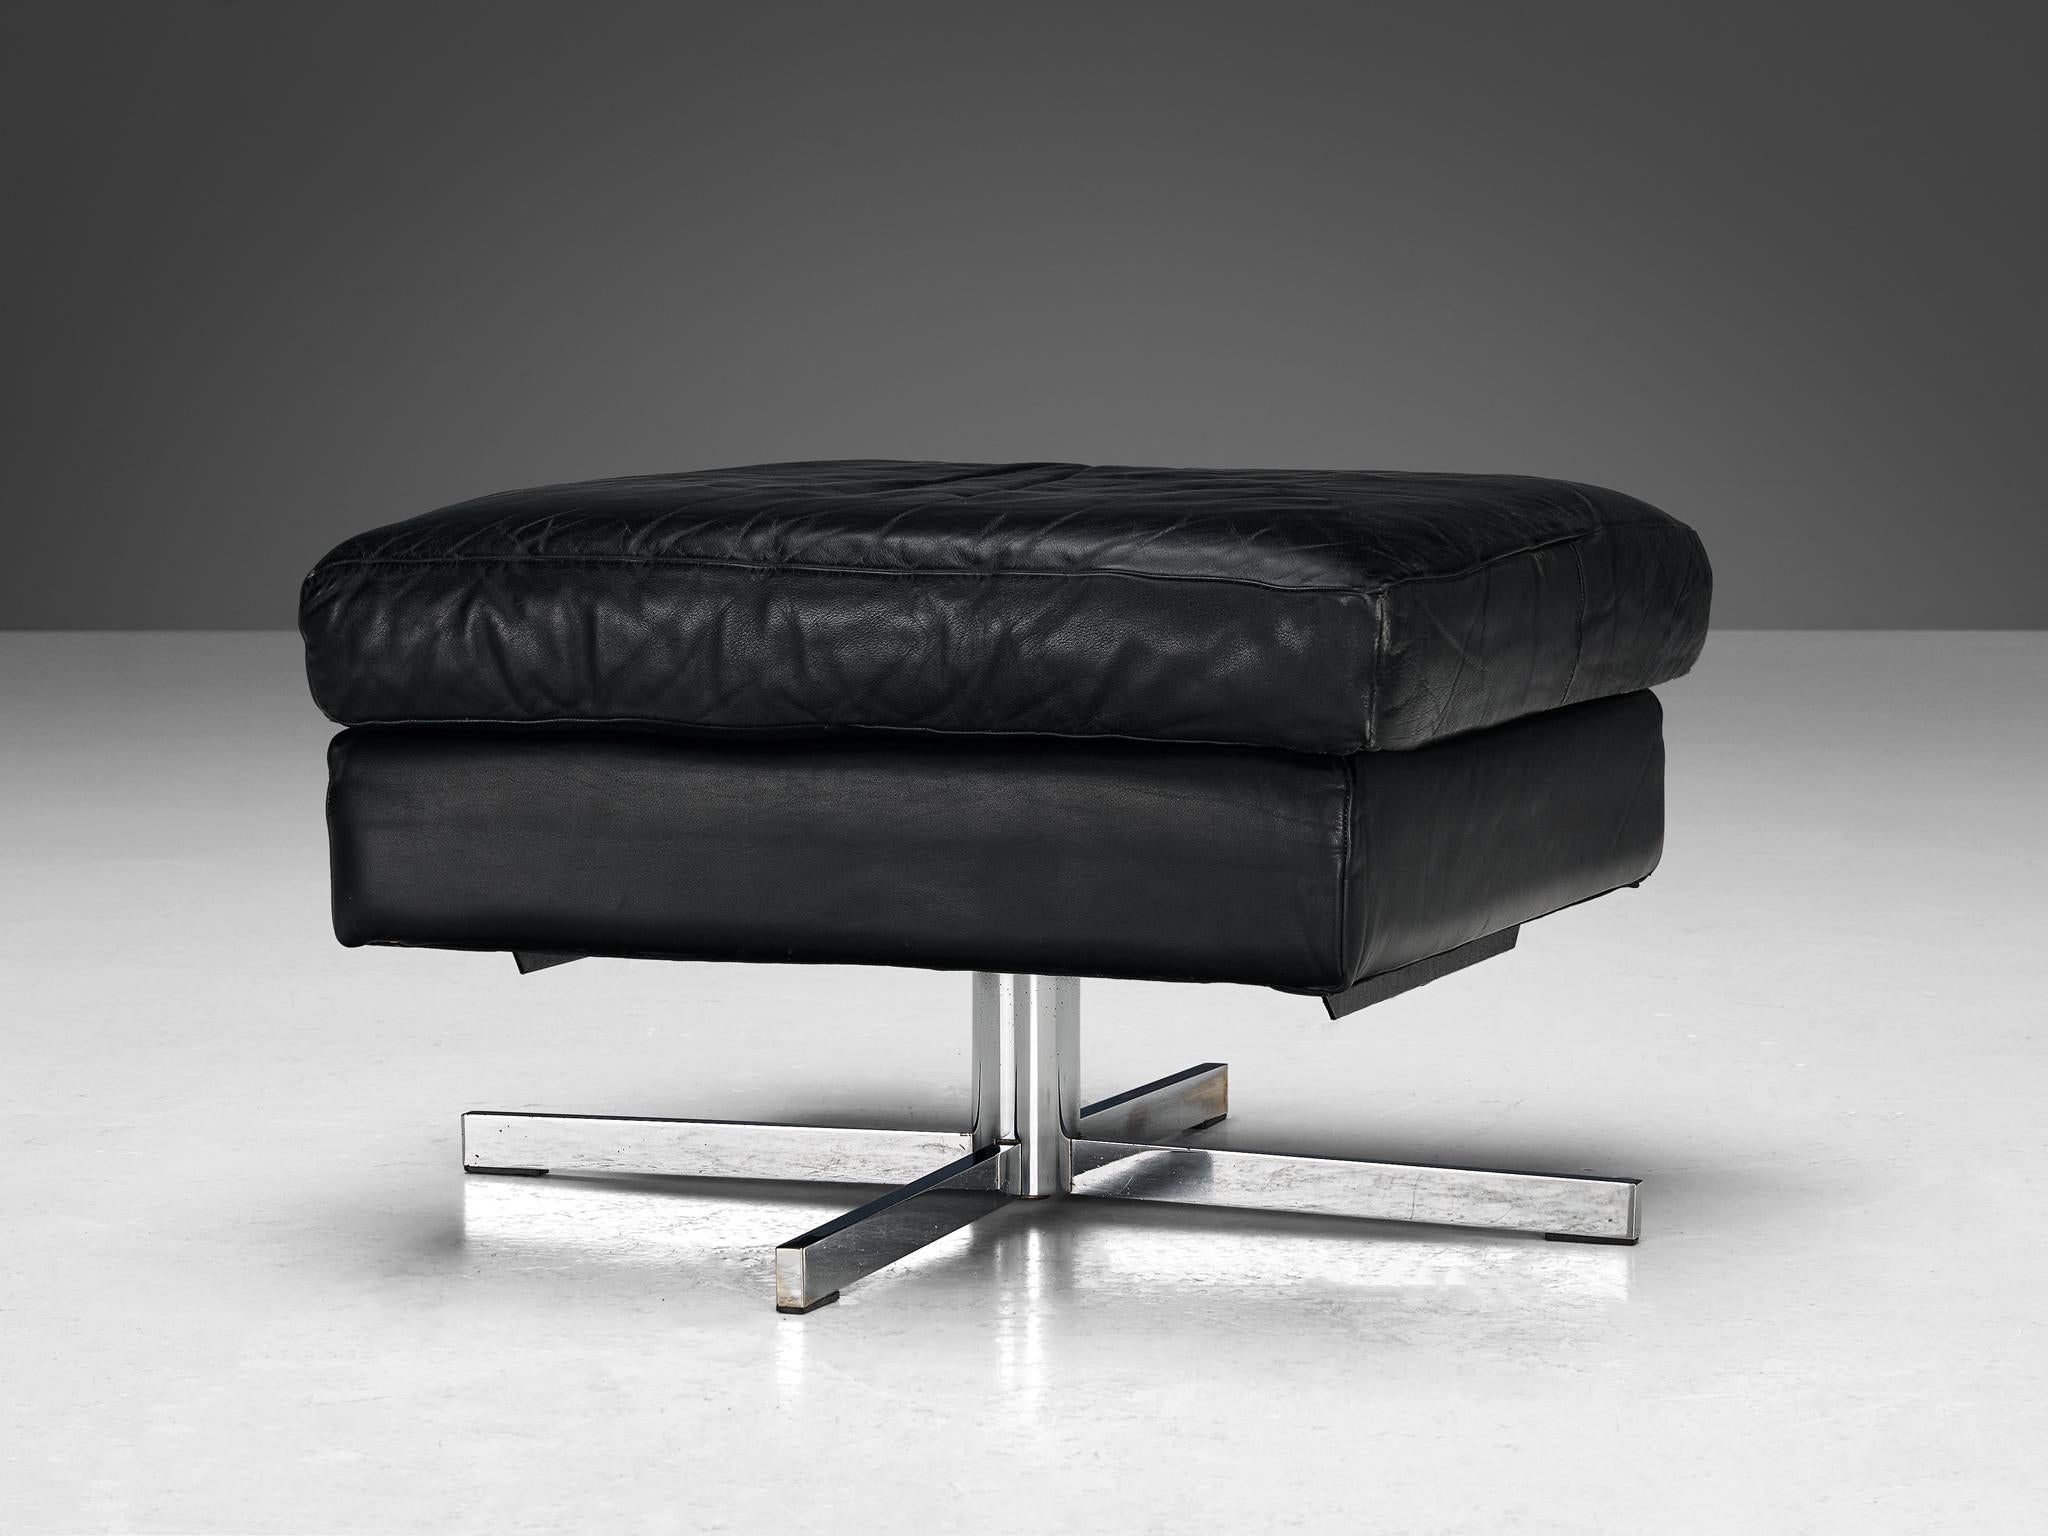 Swivel Ottoman in Black Leather and Steel Base